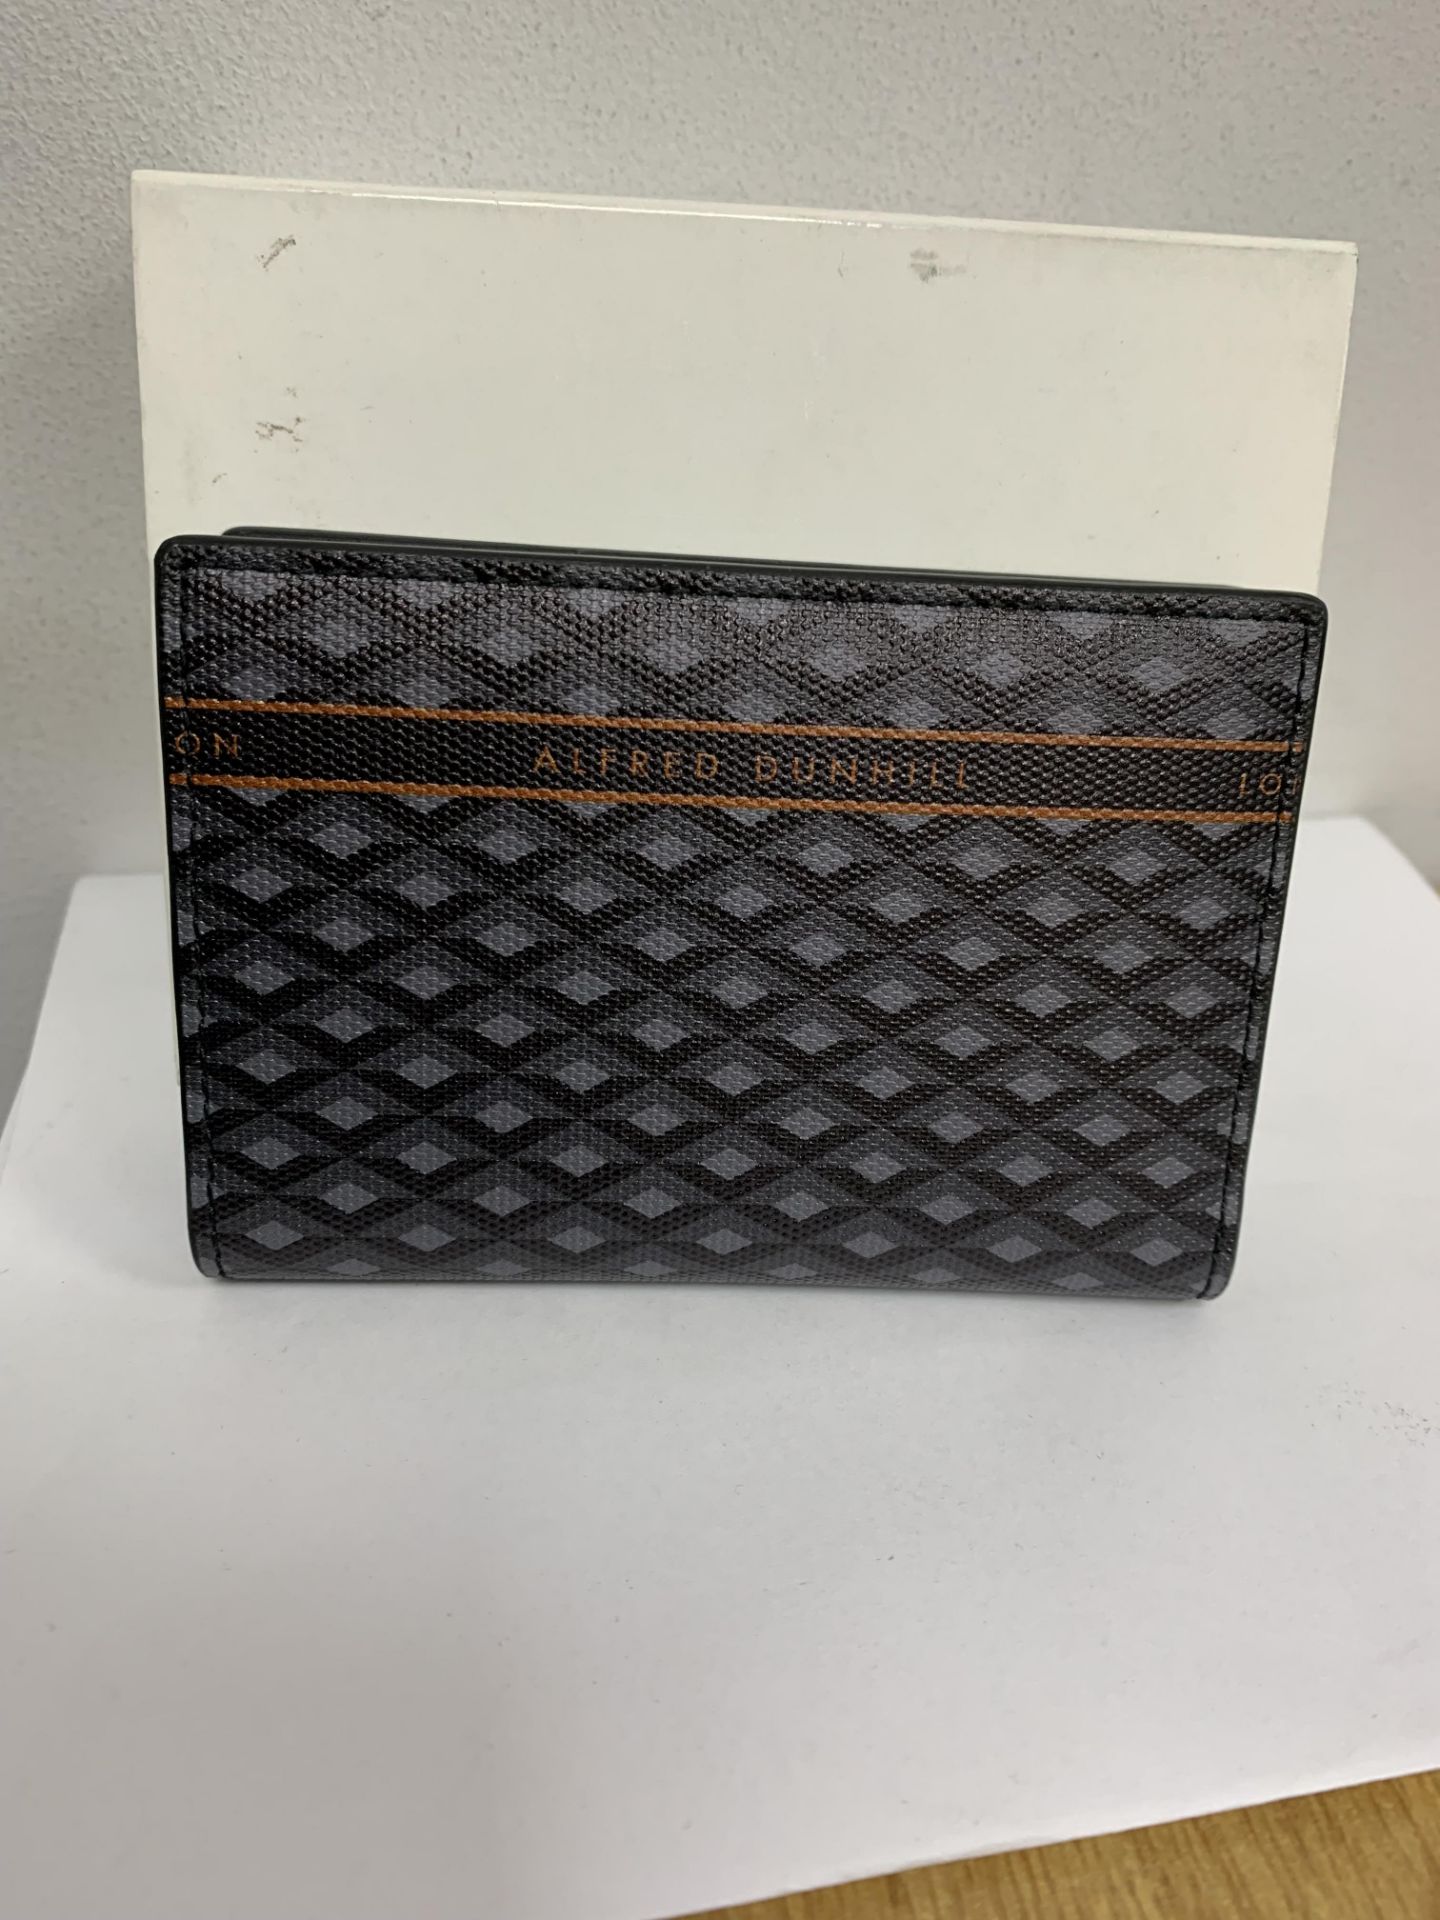 BRAND NEW ALFRED DUNHILL Gt Et Lugg Canvas Bus Card Cas, GREY (711) RRP £129 -2